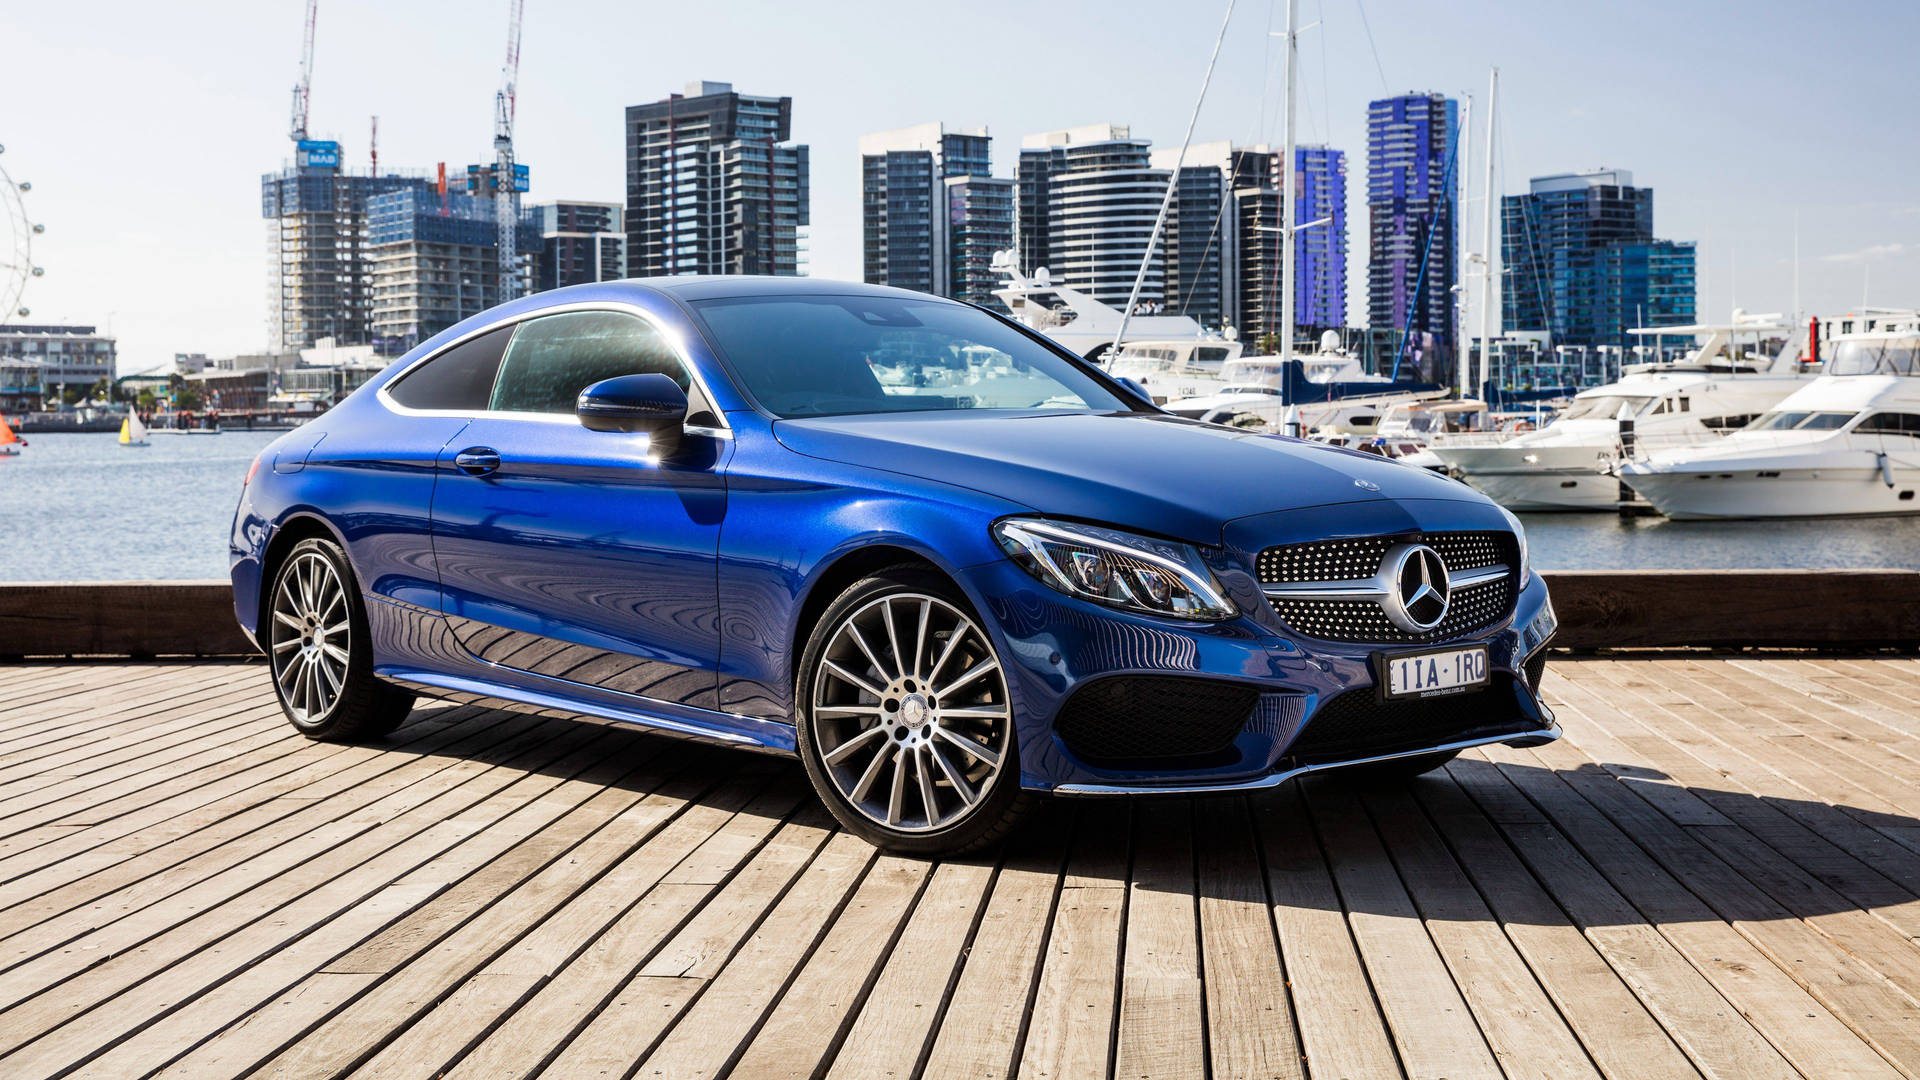 Luxurious Mercedes-benz C300 At The Dockside Background